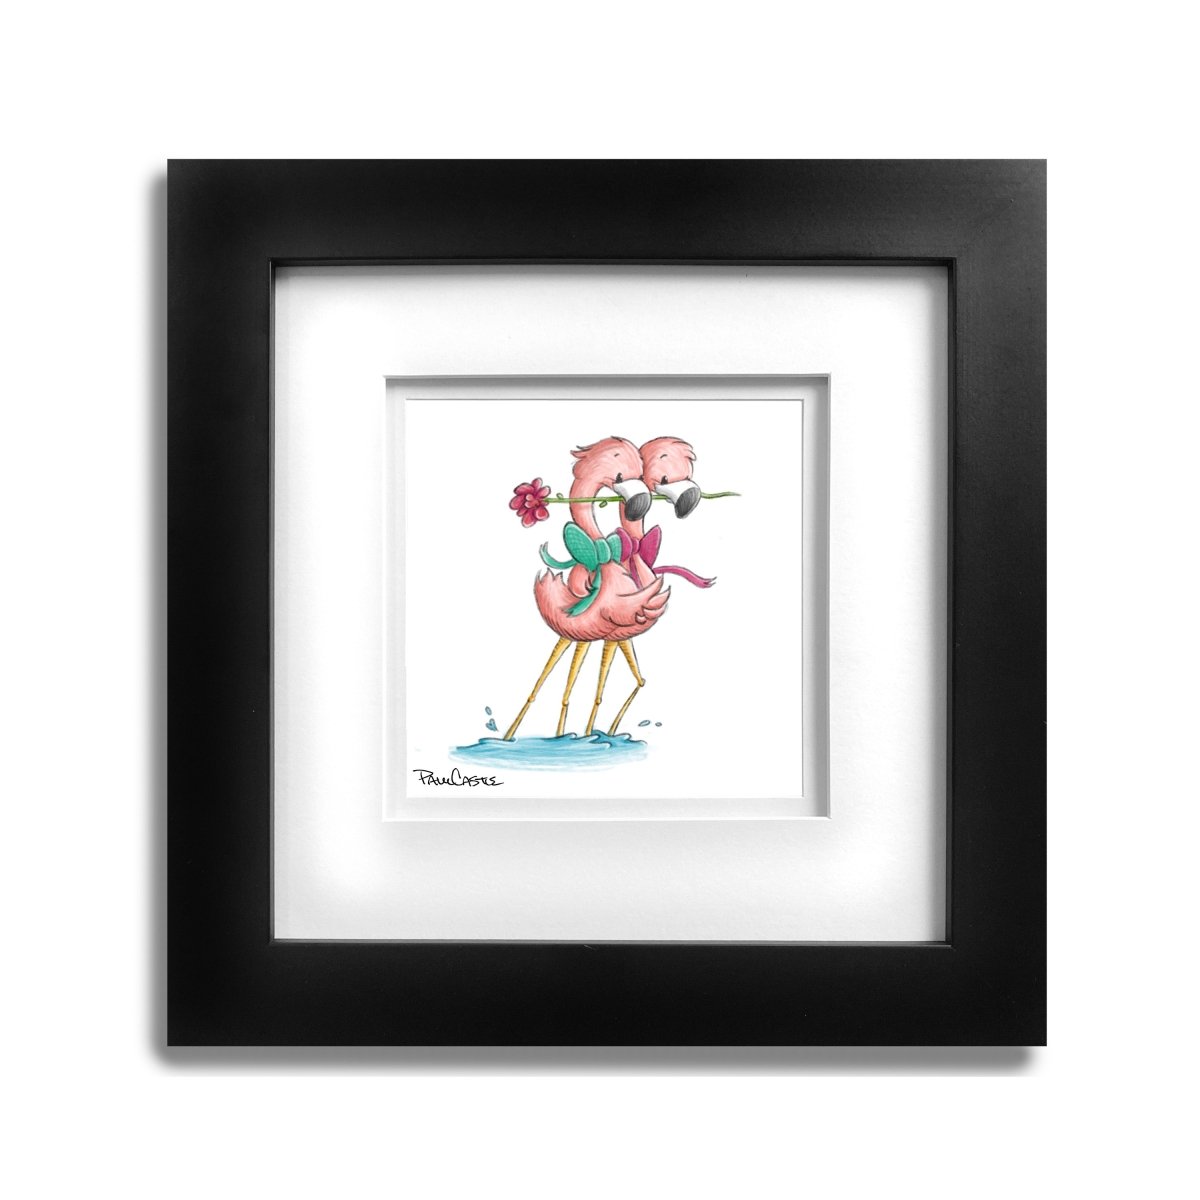 flamingos-dancing-with-rose-in-mouth-illustration-black-frame